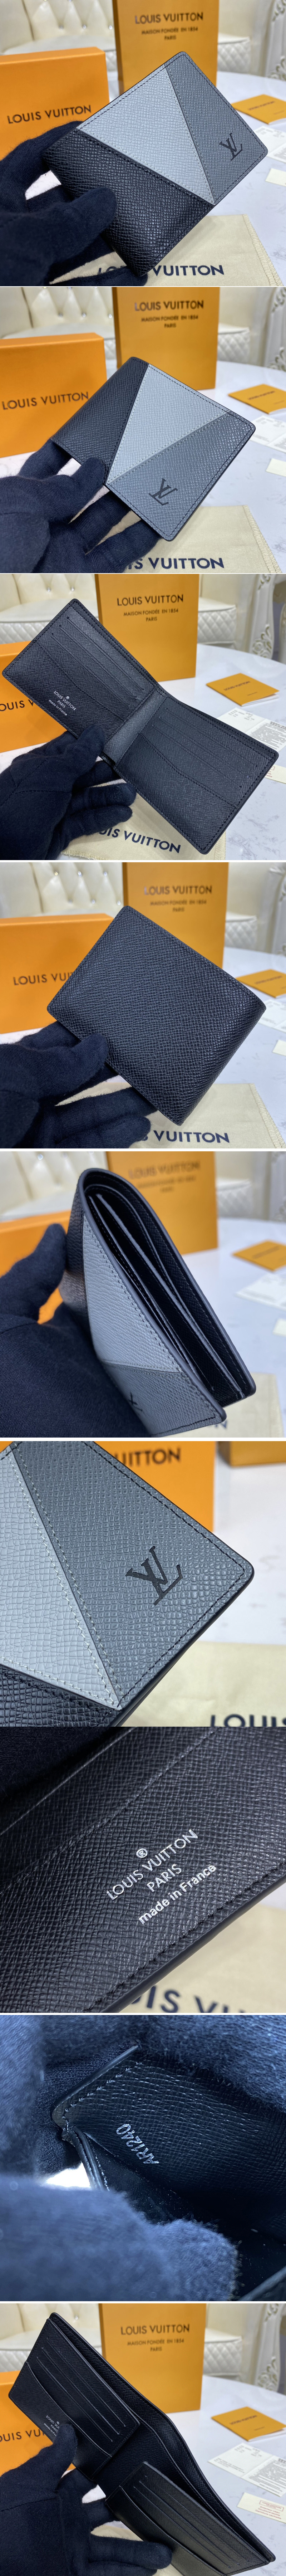 Louis Vuitton M60895 LV Multiple wallet in Gray monochrome Taiga leather  Replica sale online ,buy fake bag